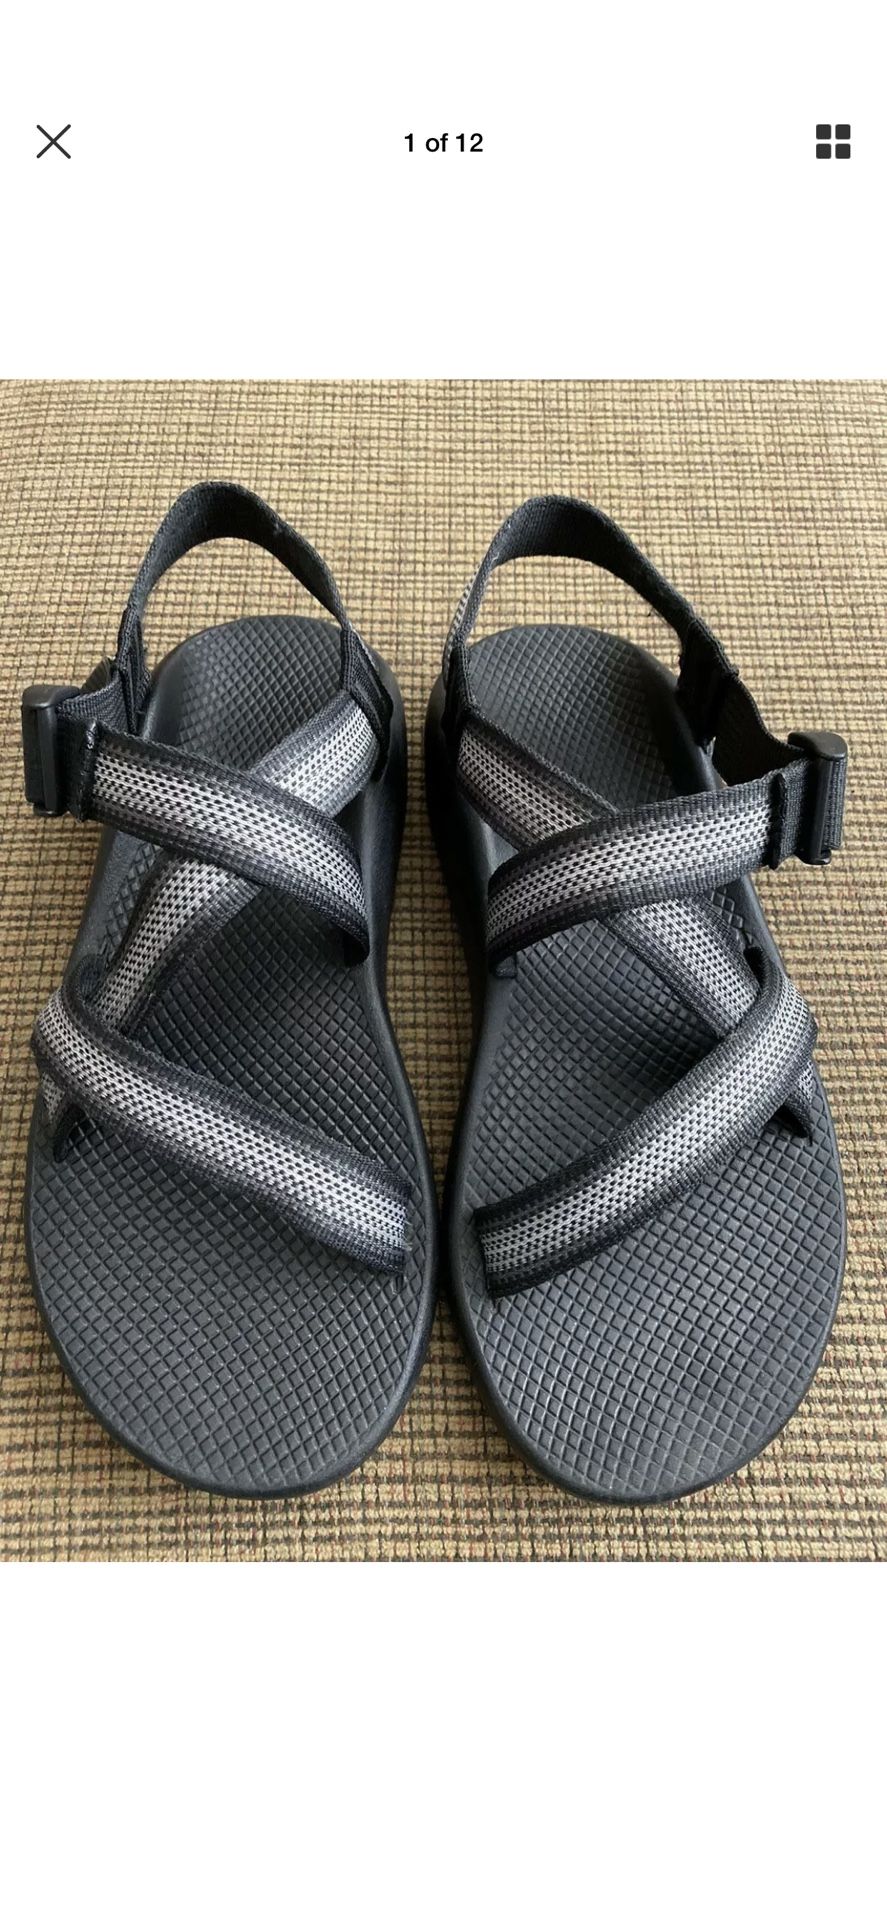 Men’s Chaco Shoes Size 10 Great Condition